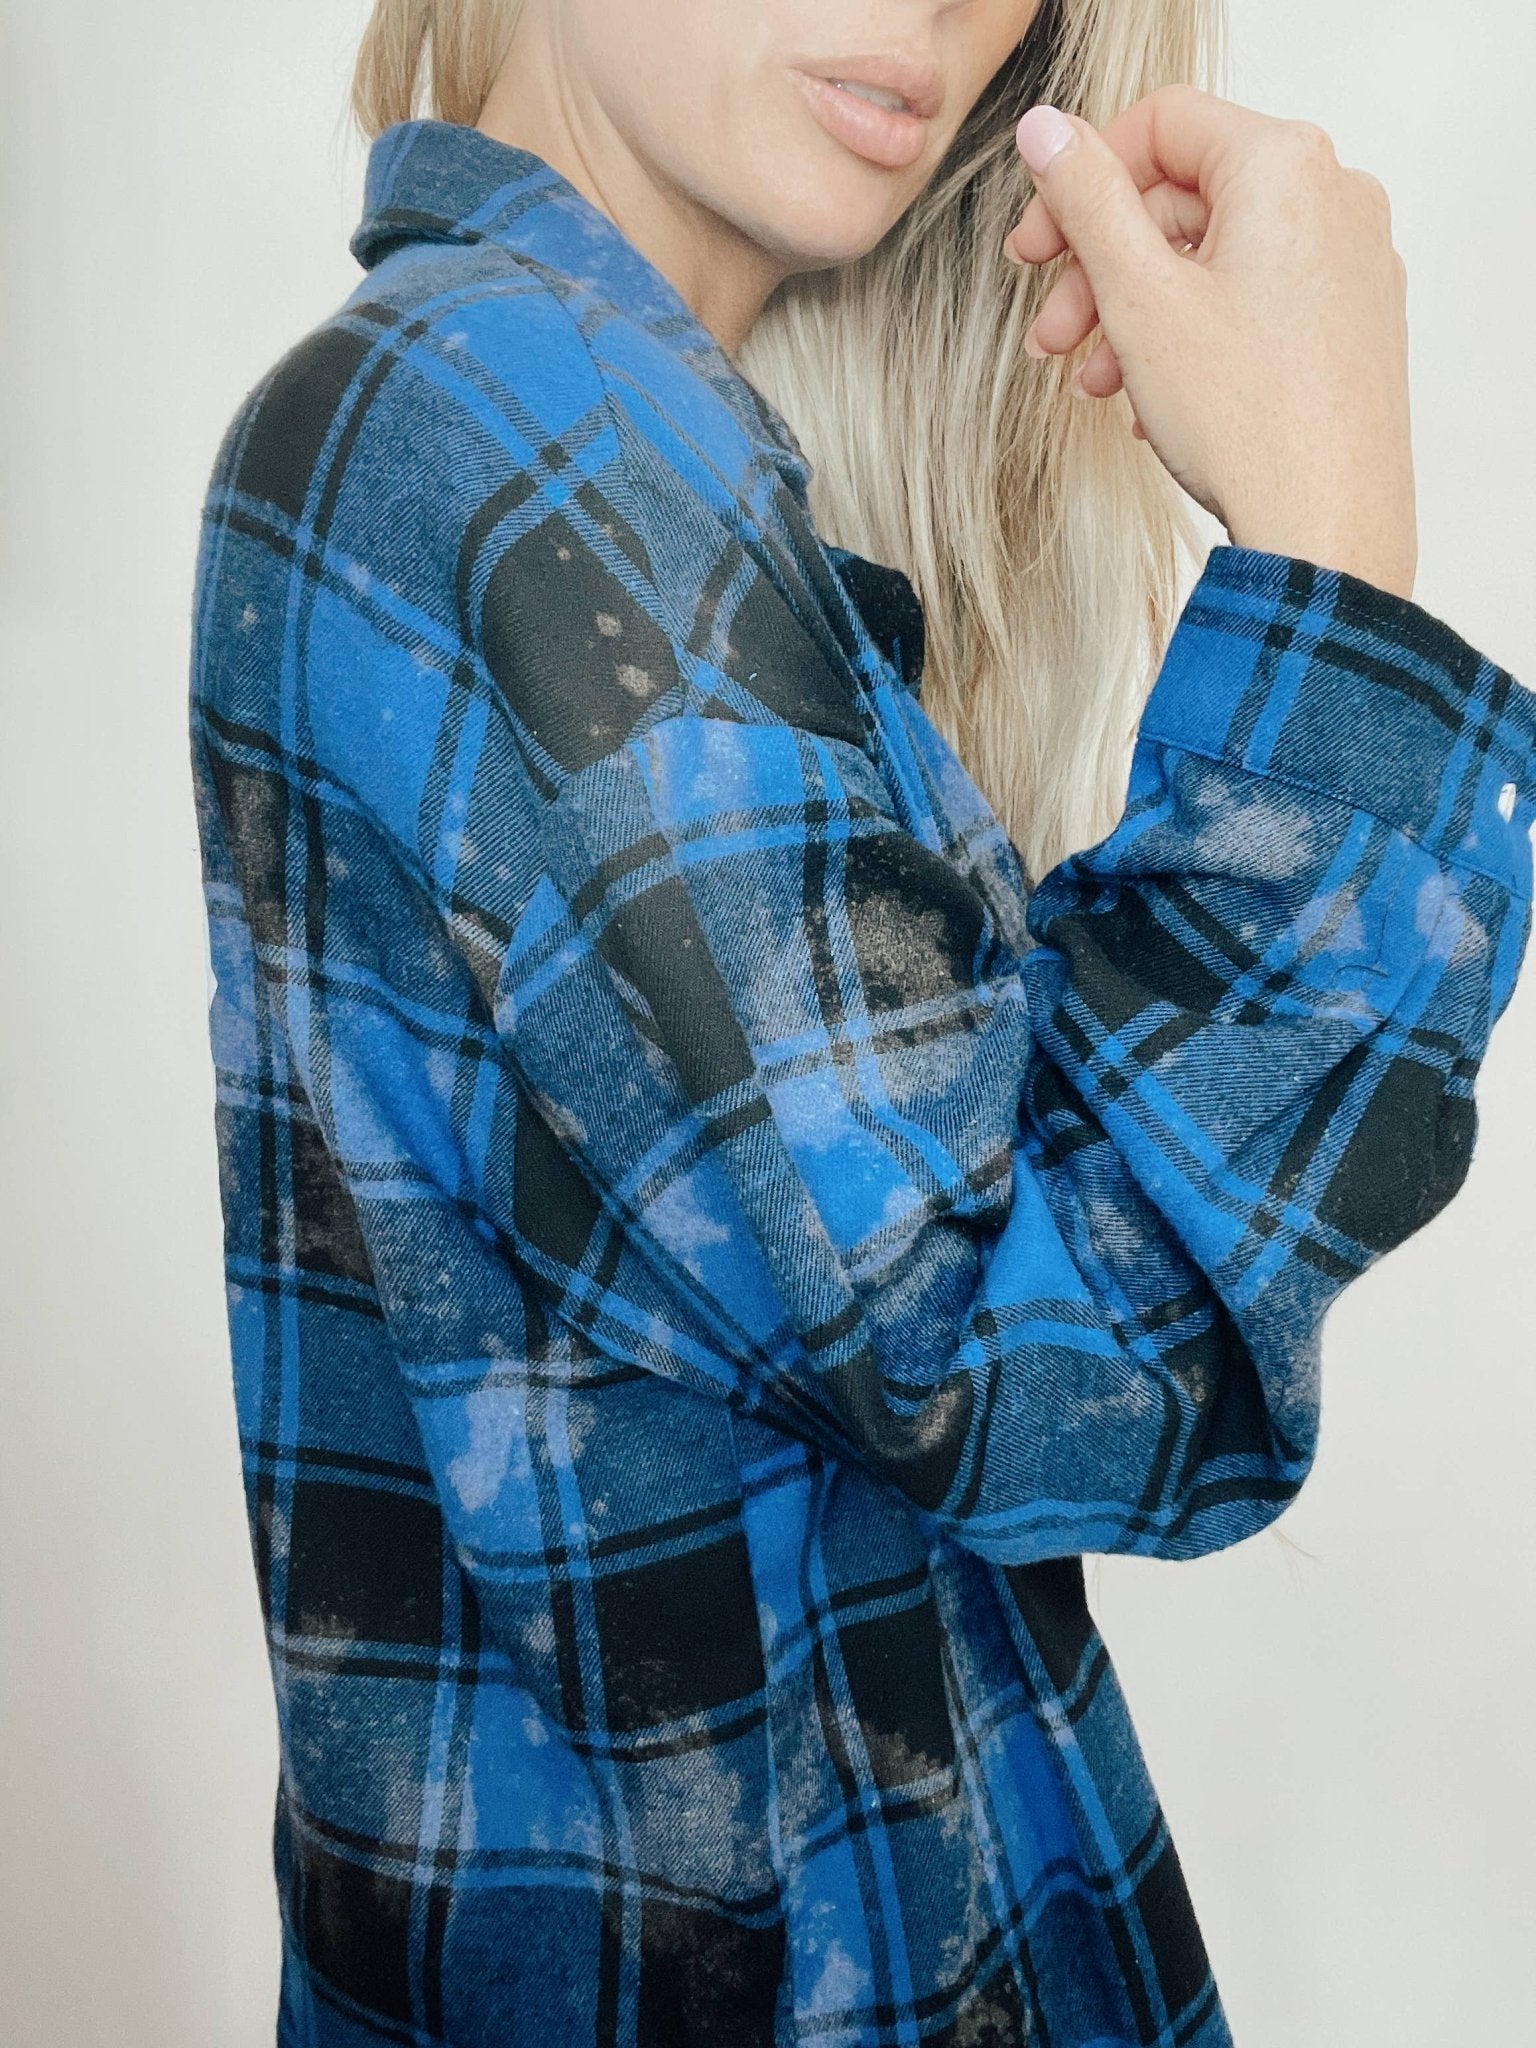 Blue Dior Hand Bleach Flannel - Something about Sofia